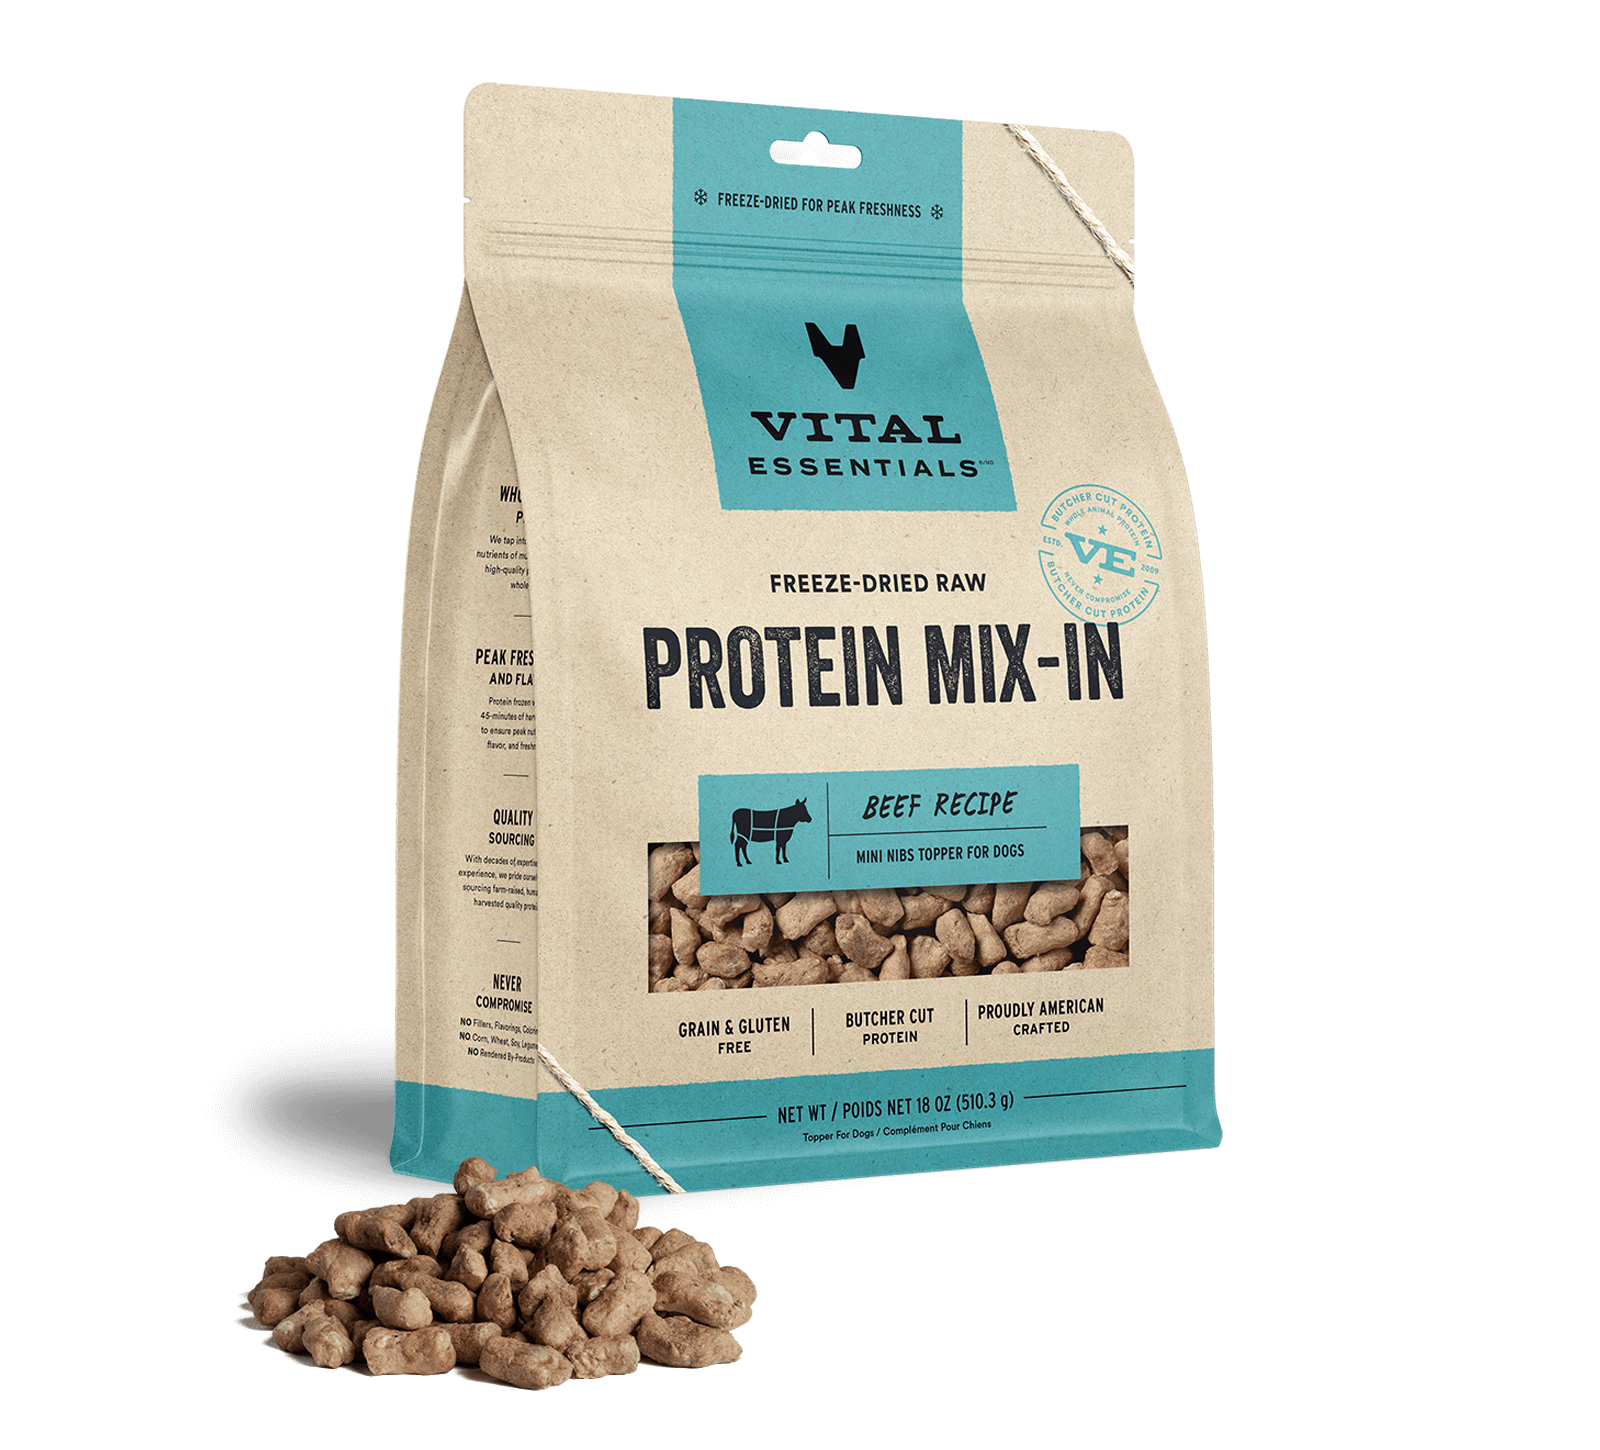 Vital Essentials Freeze-Dried Raw Protein Mix-In Beef Recipe Mini Nibs Topper for Dogs, 18 oz - Healing/First Aid